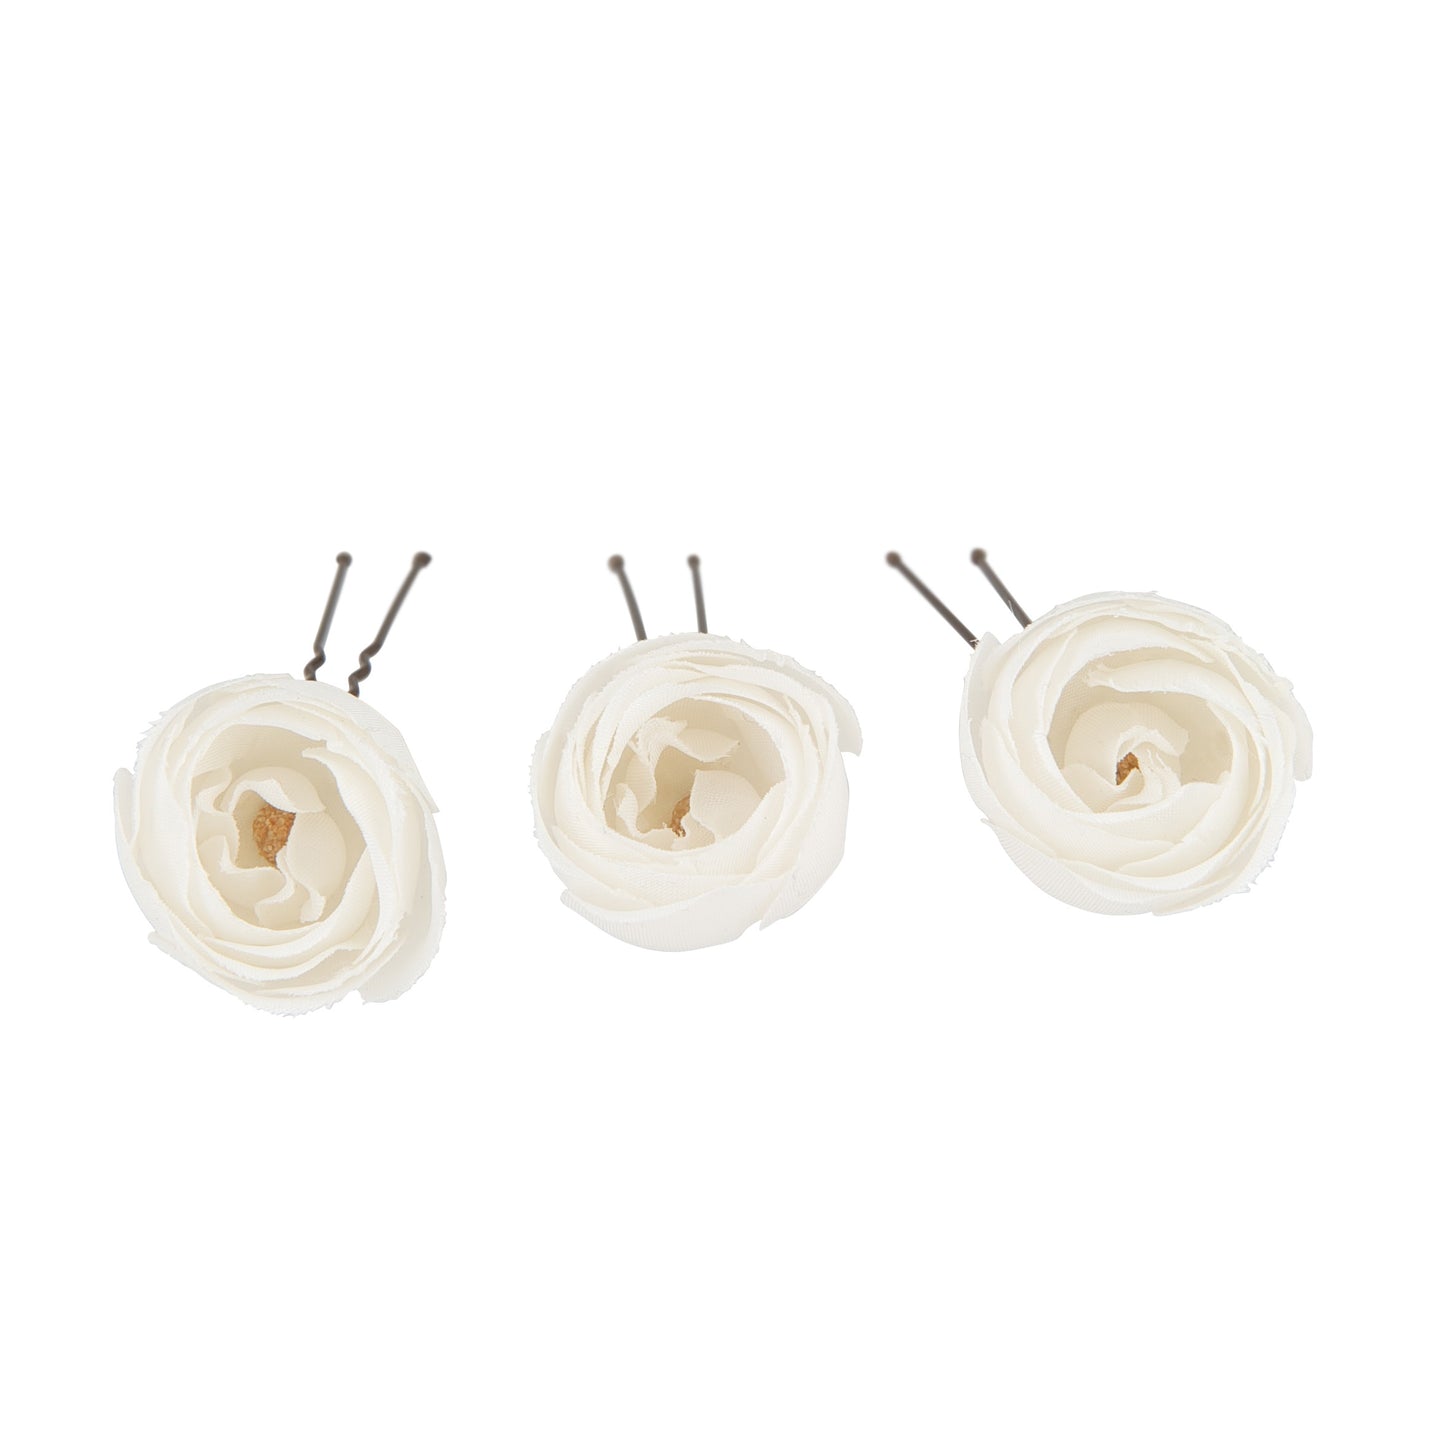 Ivory Rose Bud Hair Pins - Chez Bec (2) From £24 for 3